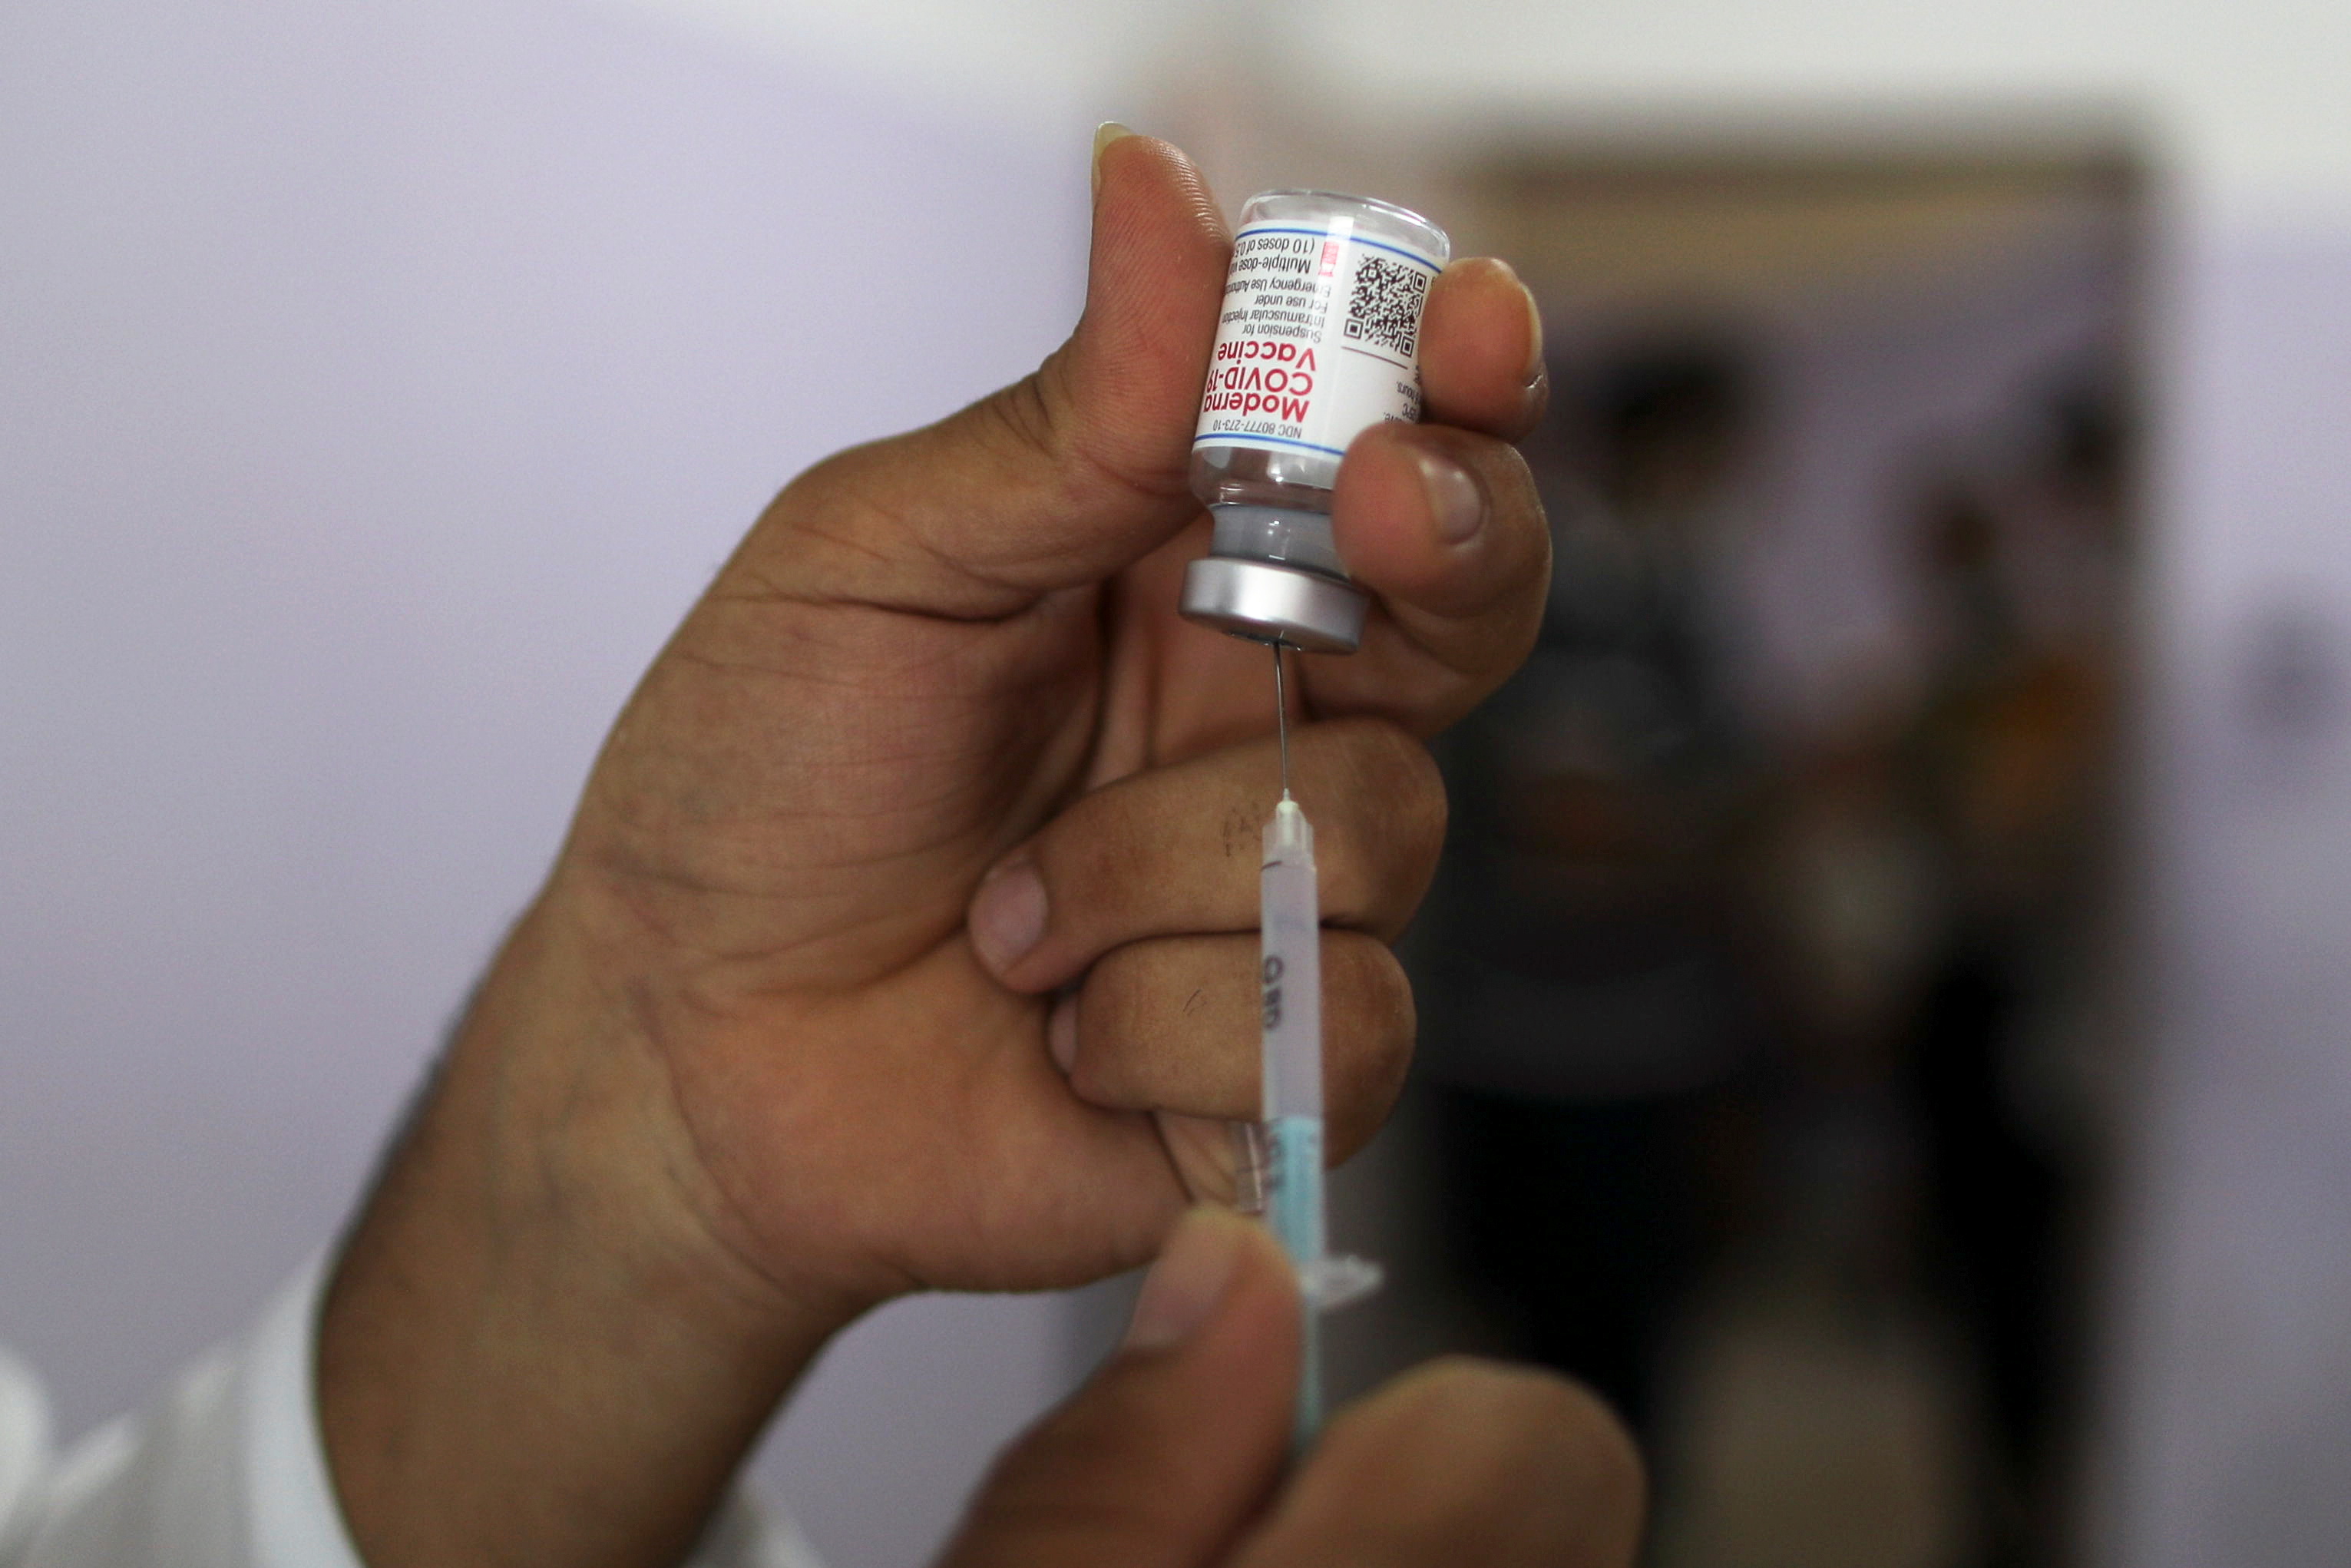 Palestinians get vaccinated against COVID-19 in Gaza